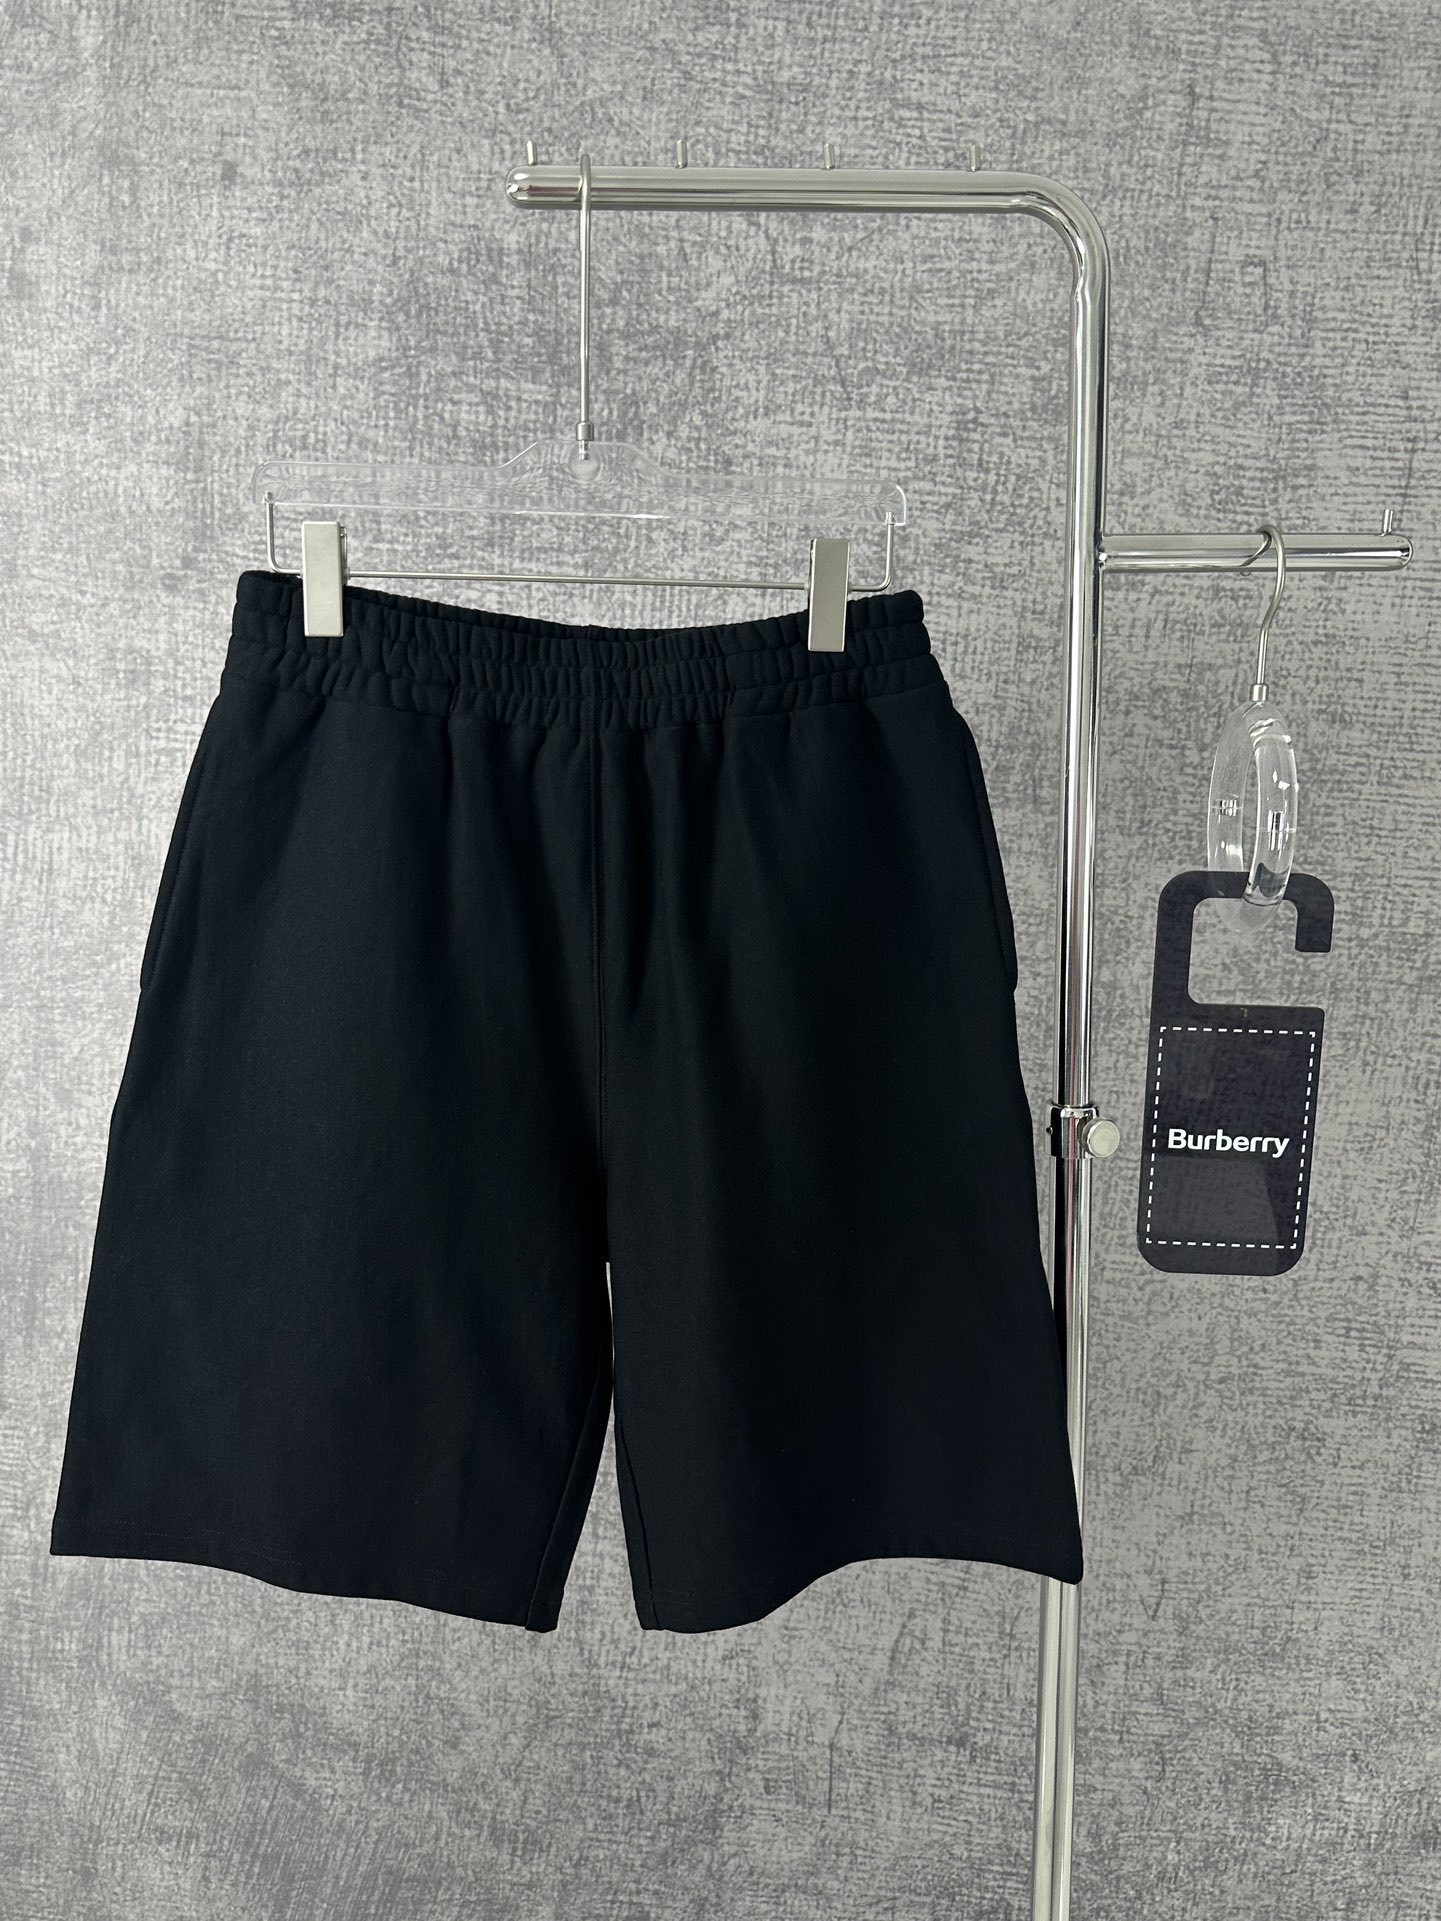 Burberry Clothing Shorts Apricot Color Black Green Cotton Spring/Summer Collection Casual